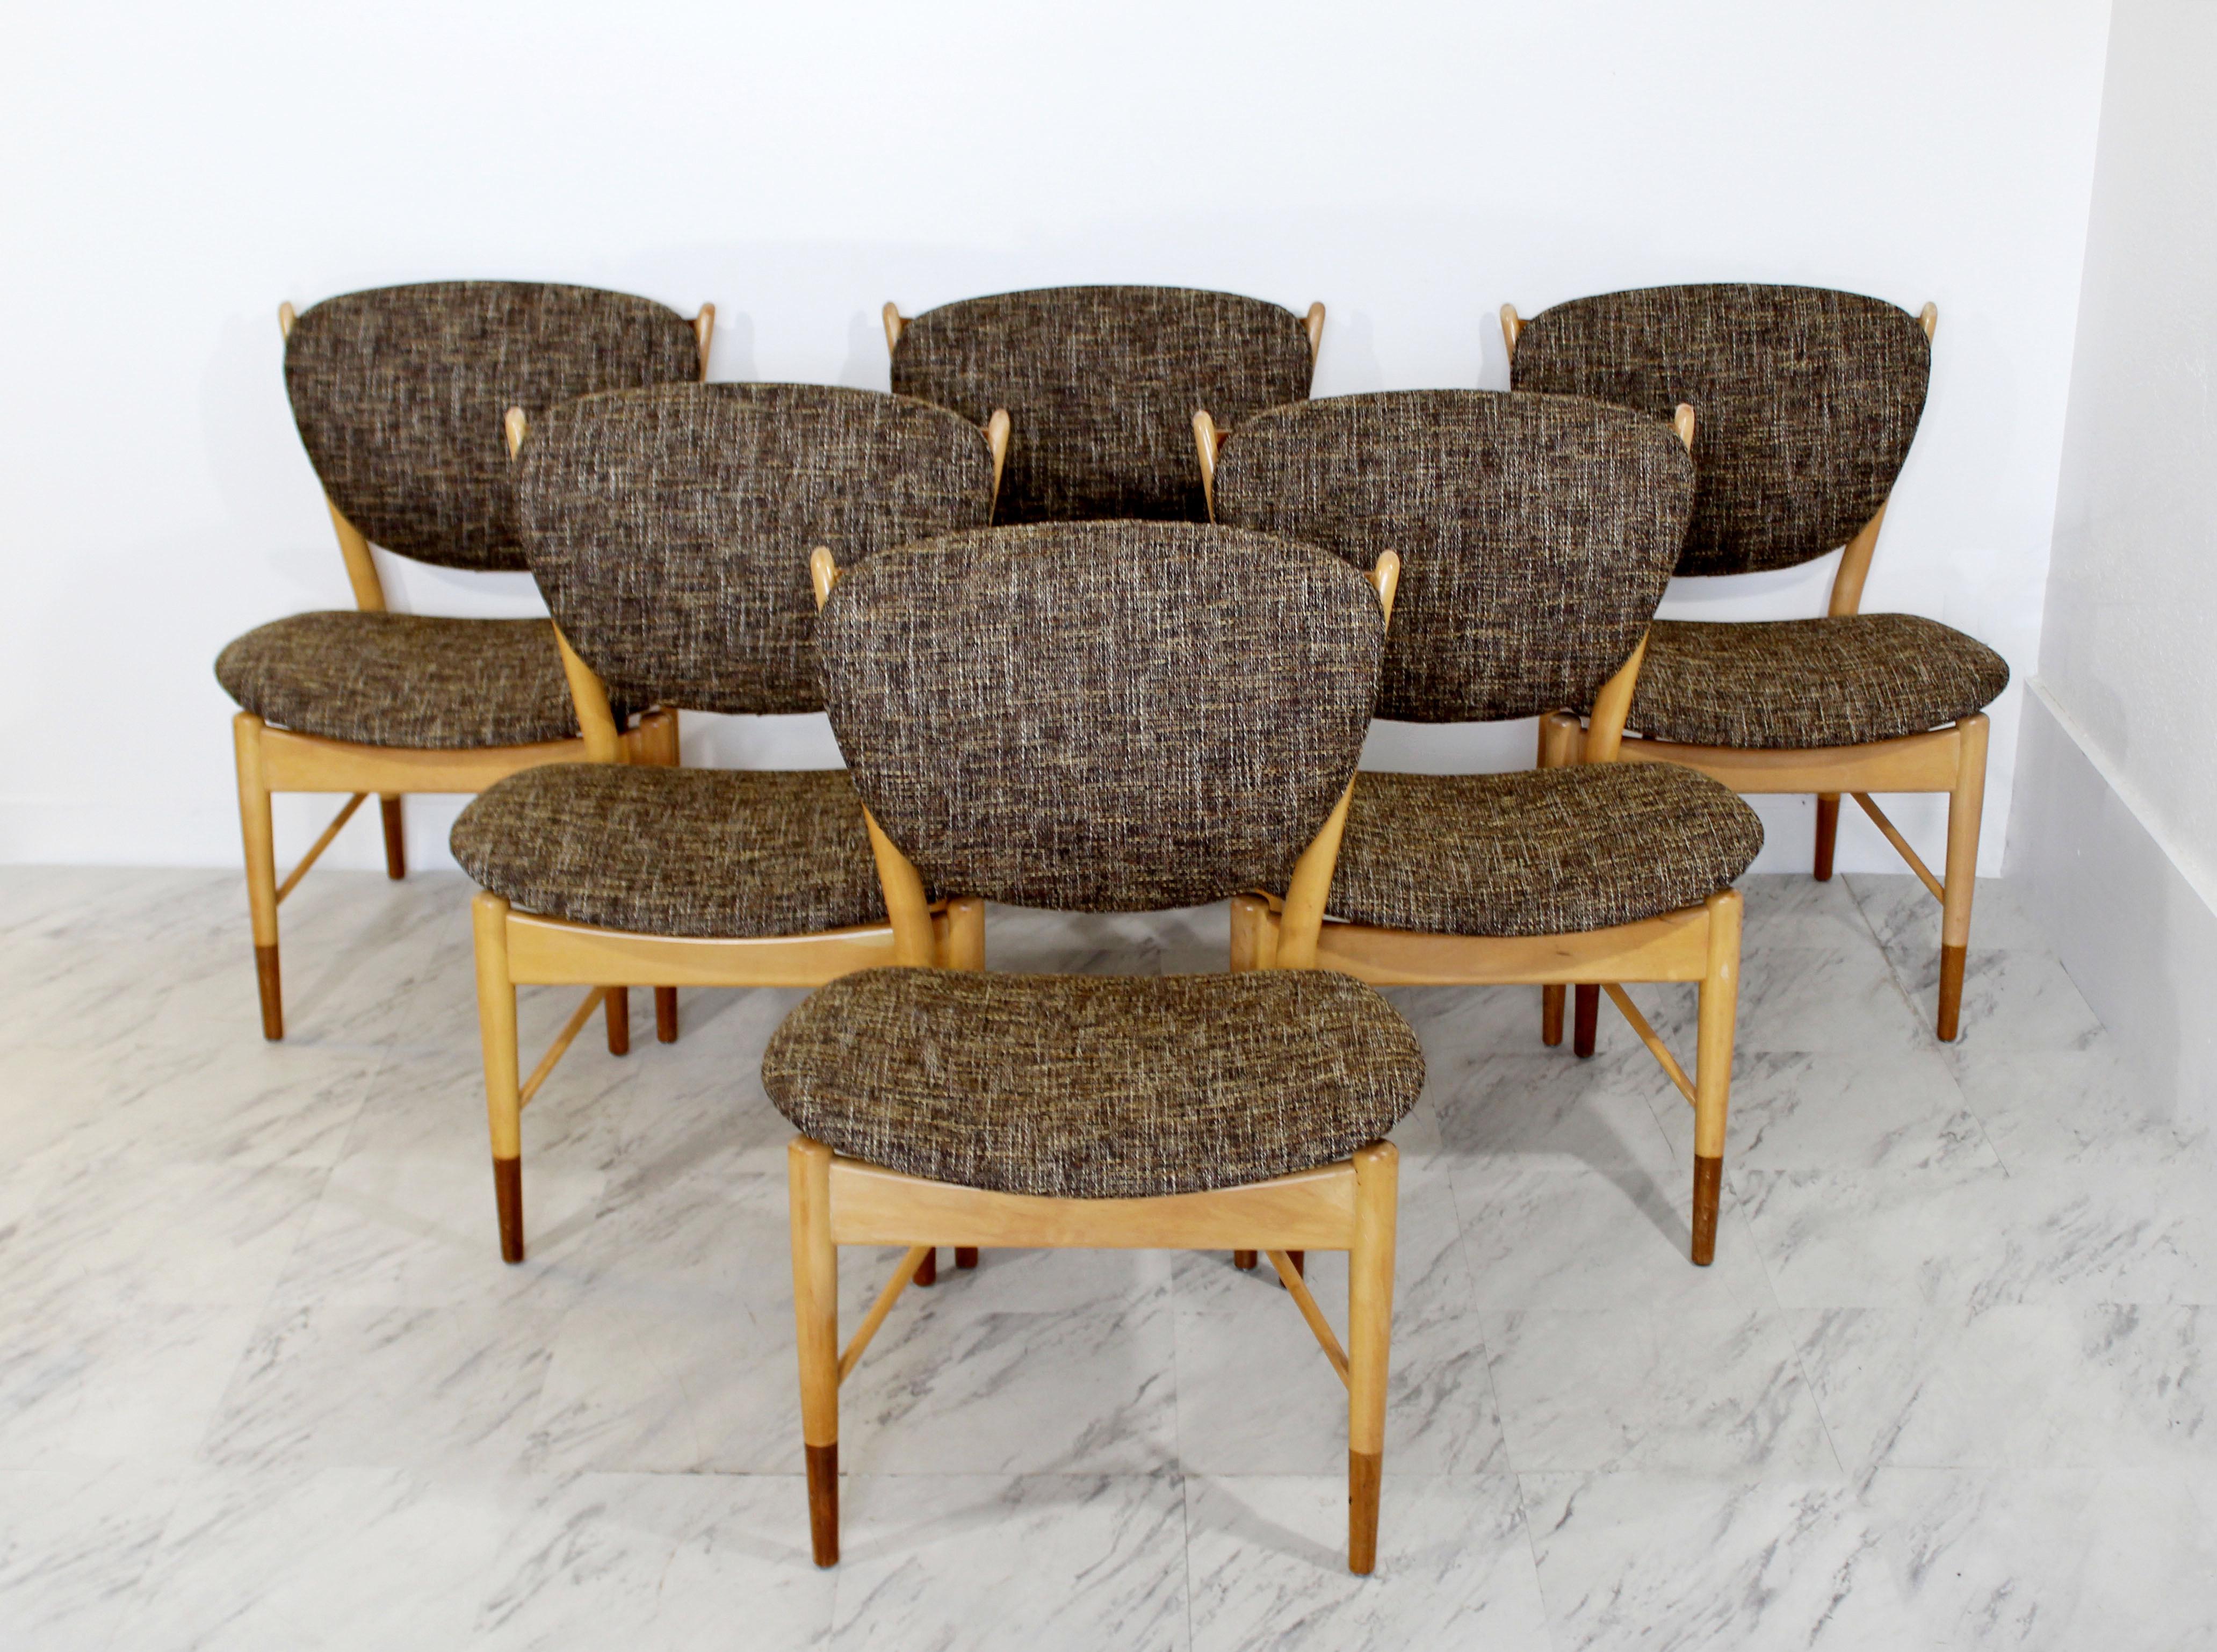 For your consideration is a wonderful, set of six side dining chairs by Finn Juhl NV-51 for the Baker Furniture Company, circa the 1960s. They are maple and teak. They have just come back from being professionally reupholstered in a beautiful